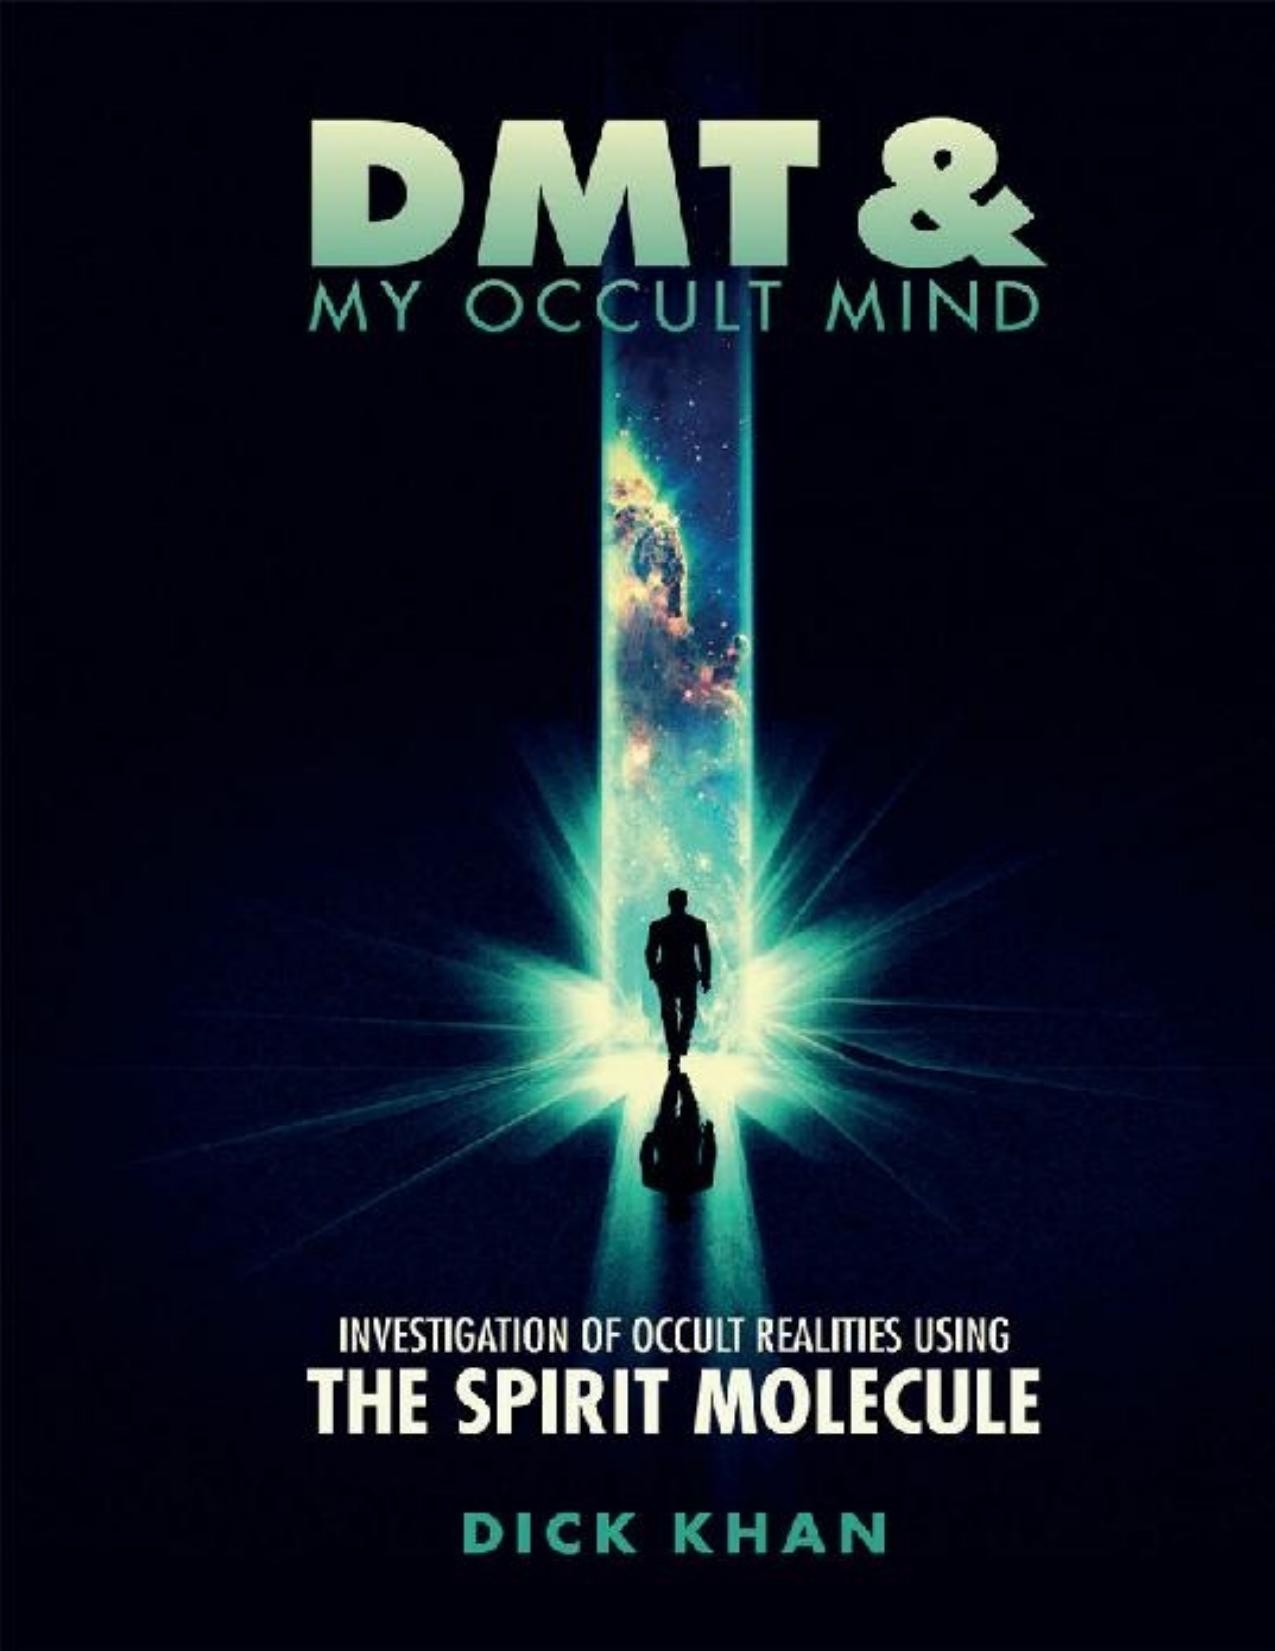 DMT & My Occult Mind: Investigation of Occult Realities Using the Spirit Molecule